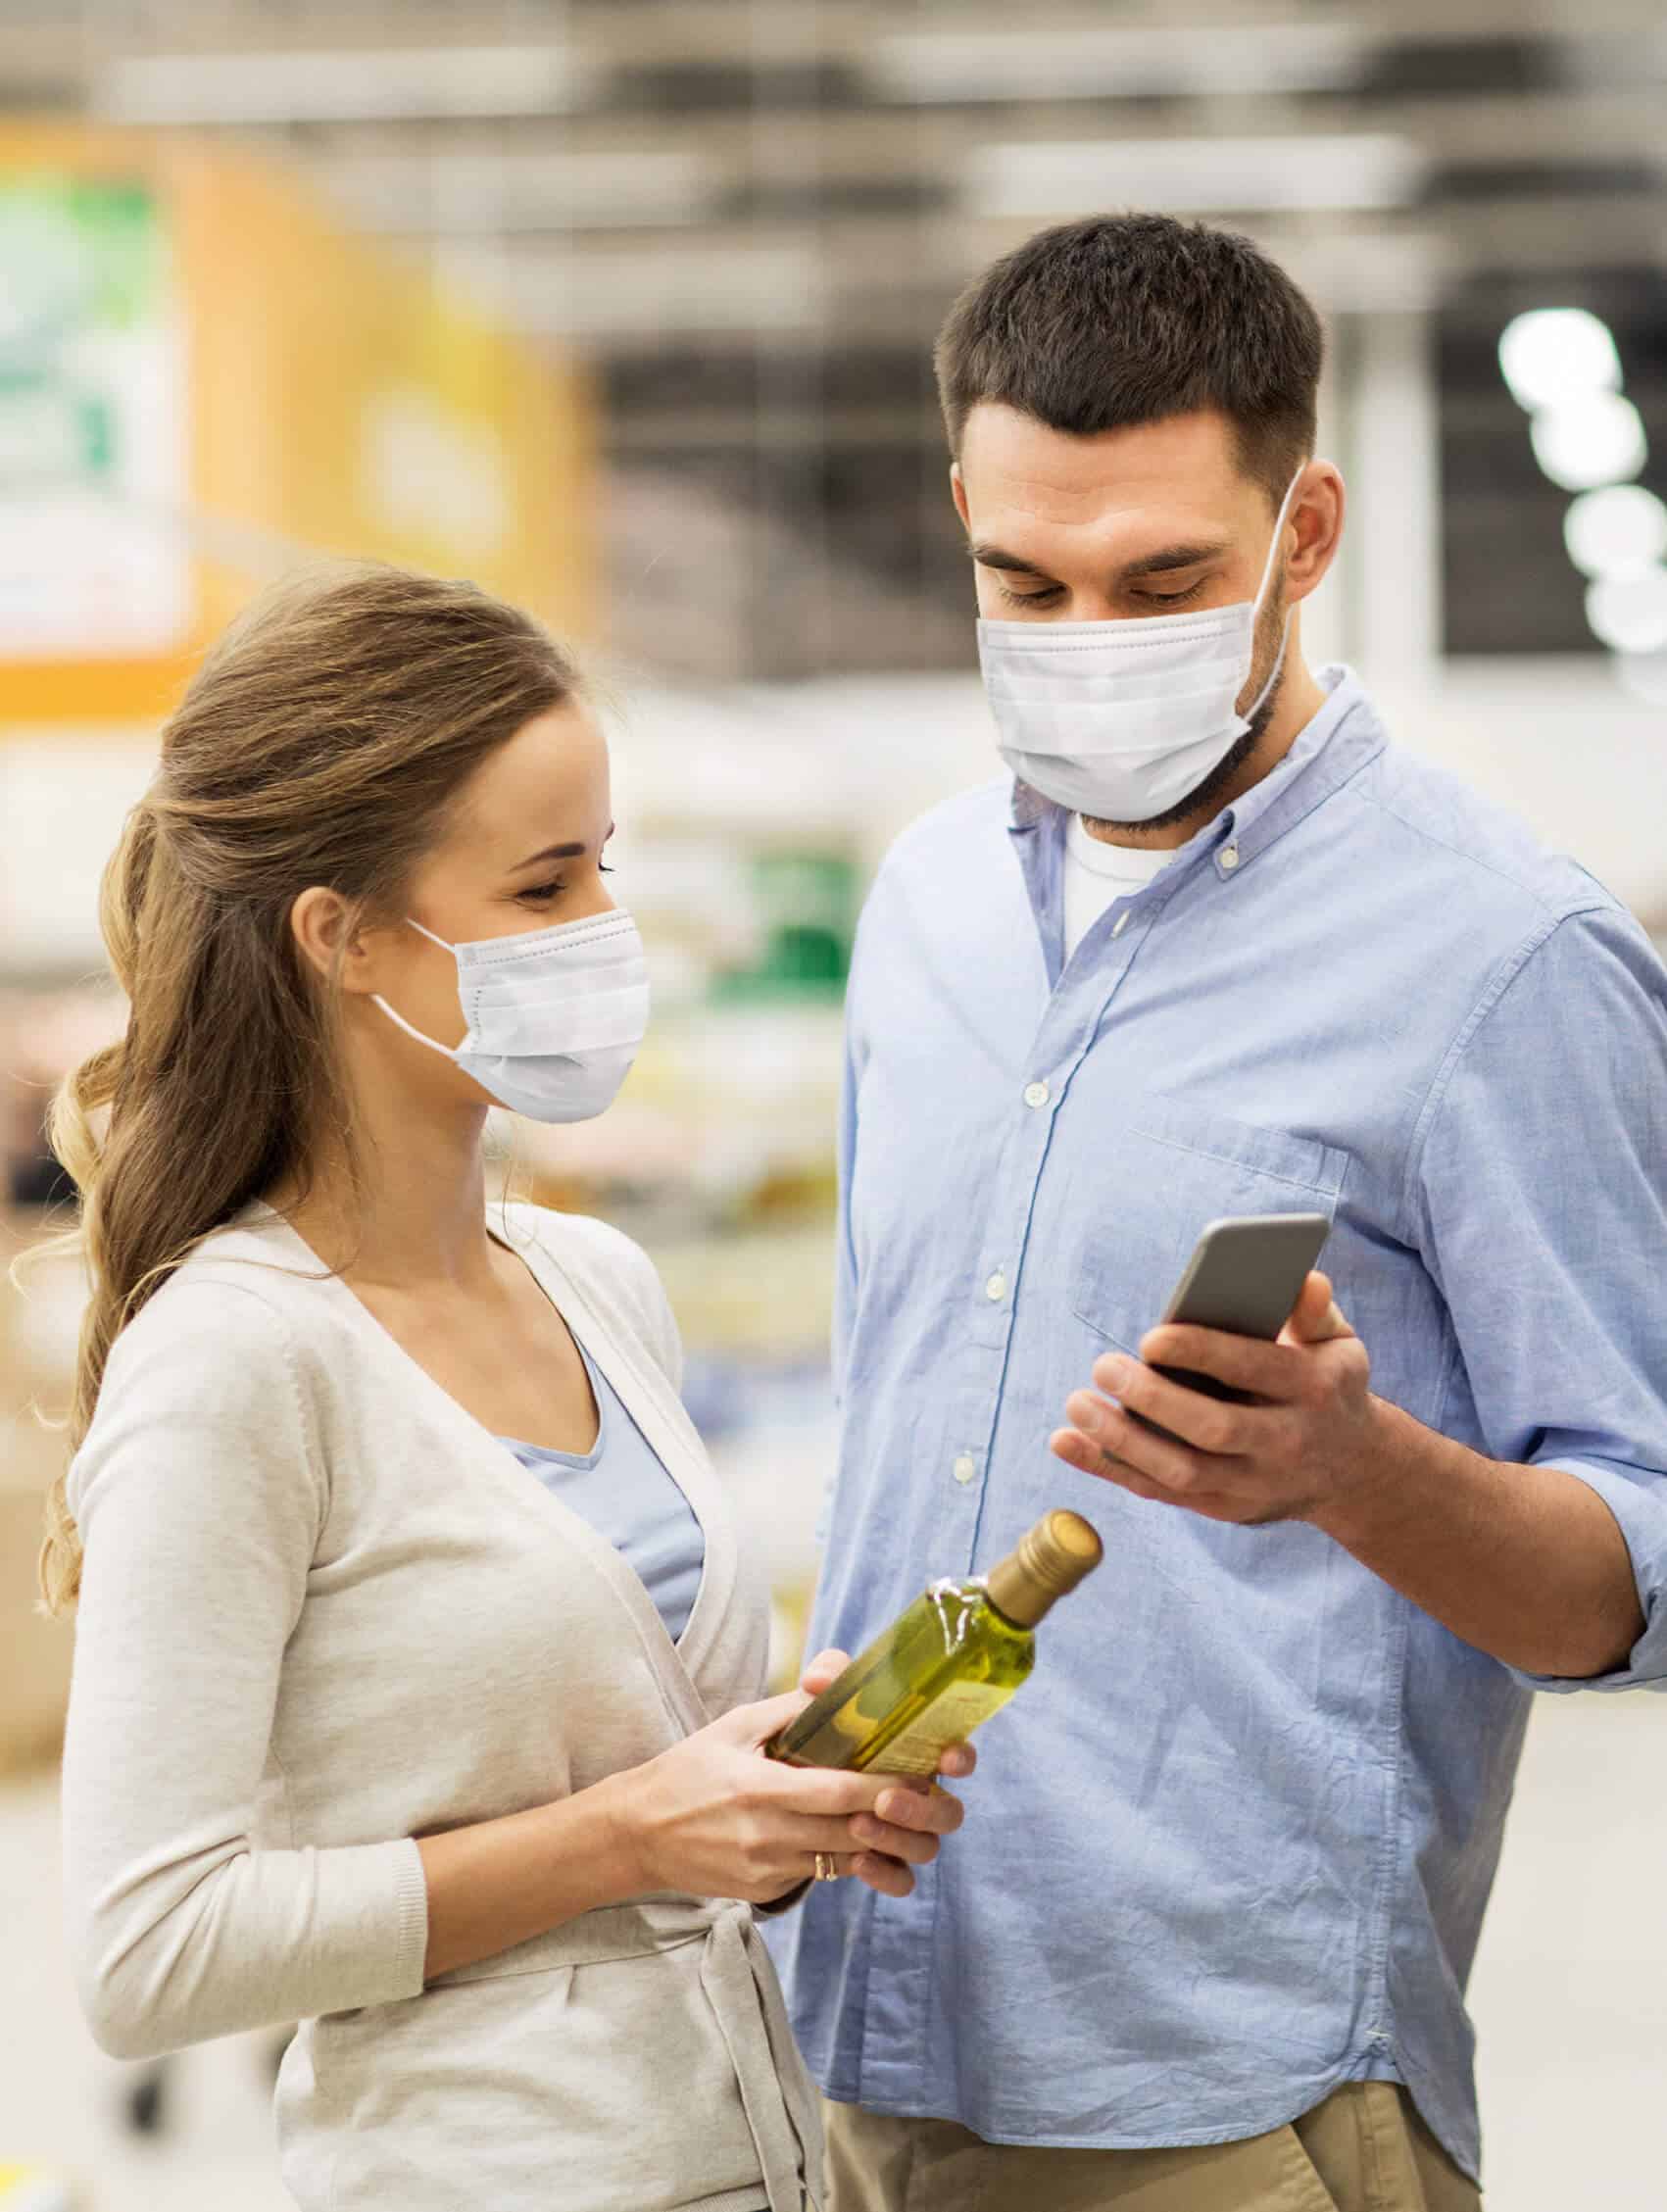 Man and woman grocery shopping while looking at a phone